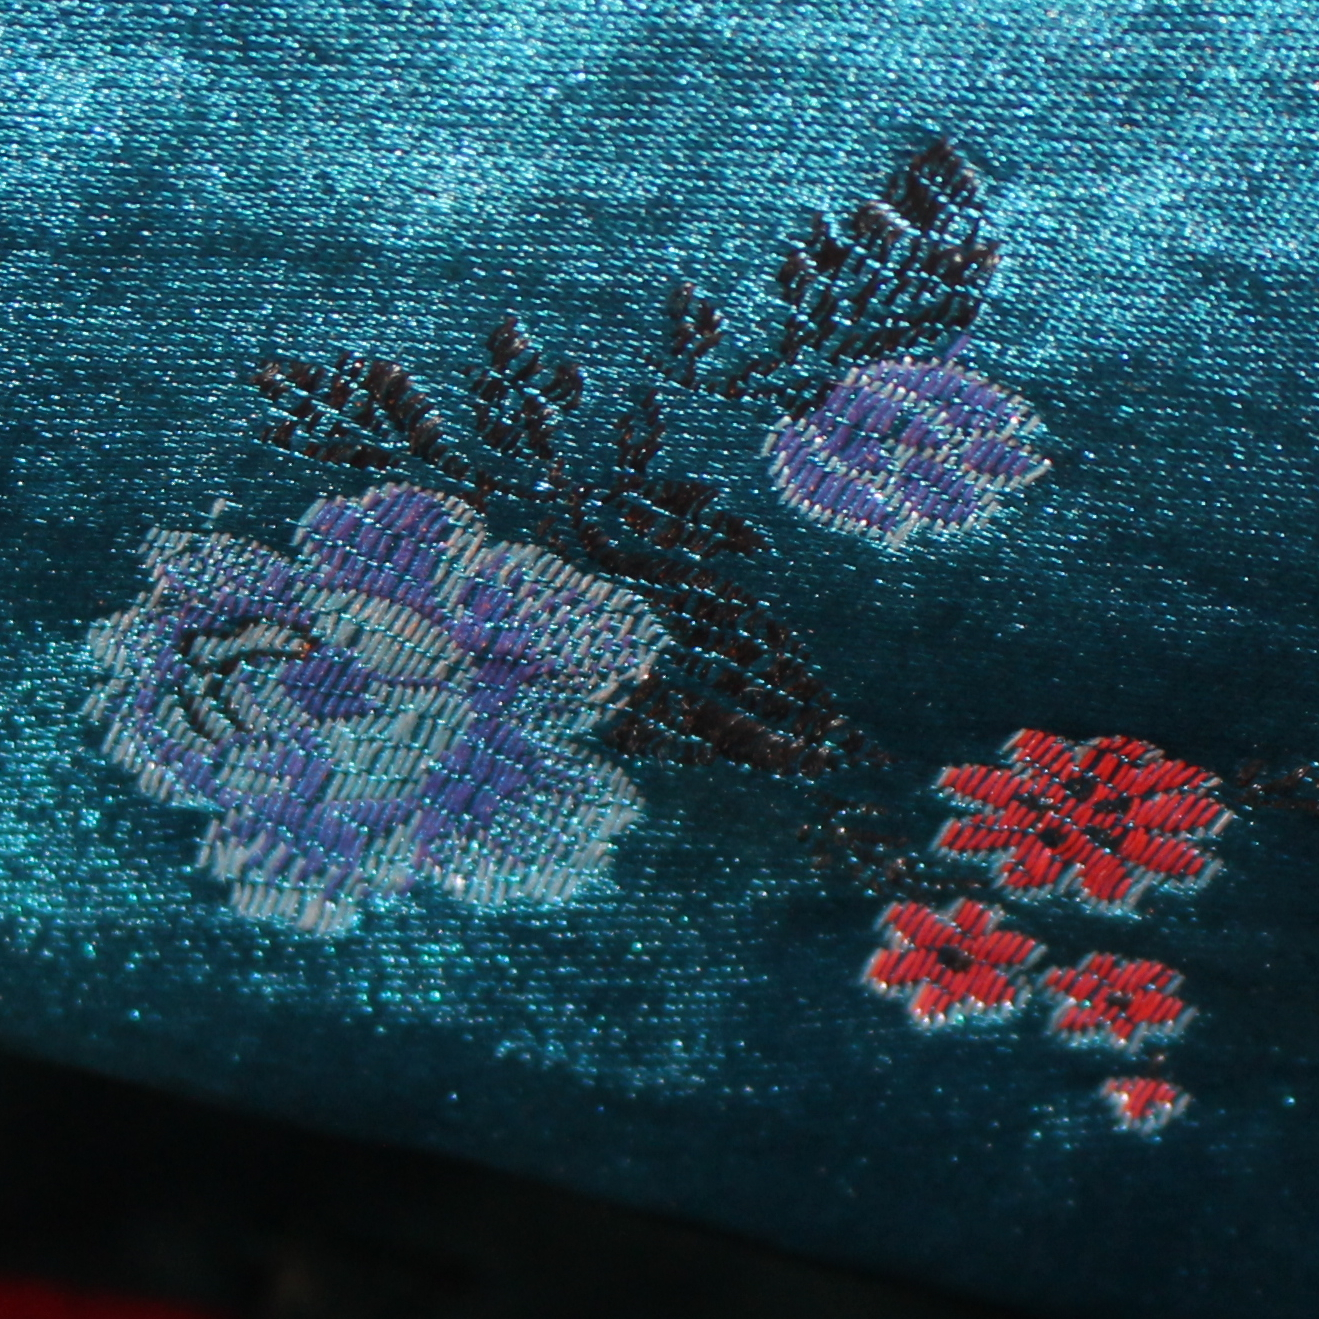 Blue Chinese silk top, showing detail of embroidery 
stitching